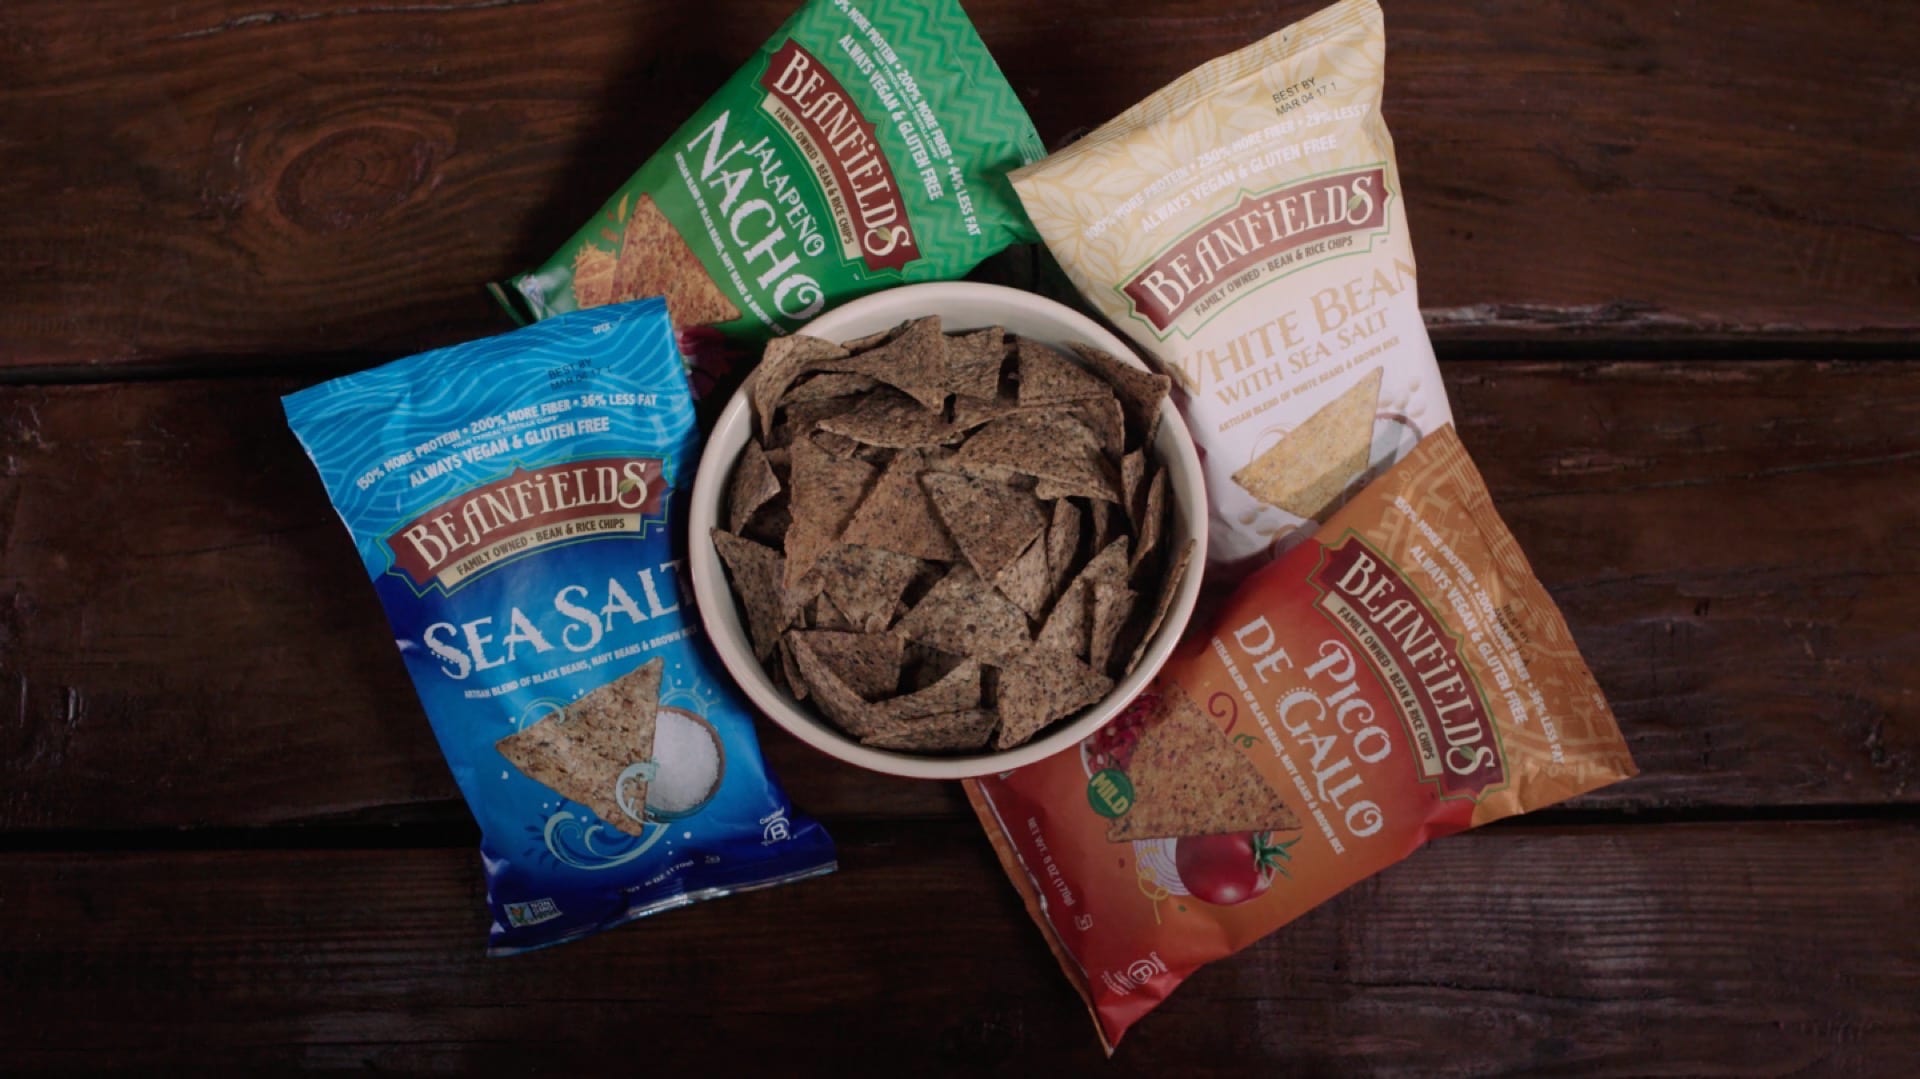 Beanfields Snacks Bowl of brown bean chips surrounded by four bags of Beanfields brand bean chips of different flavors in blue, orange, white and green bags.